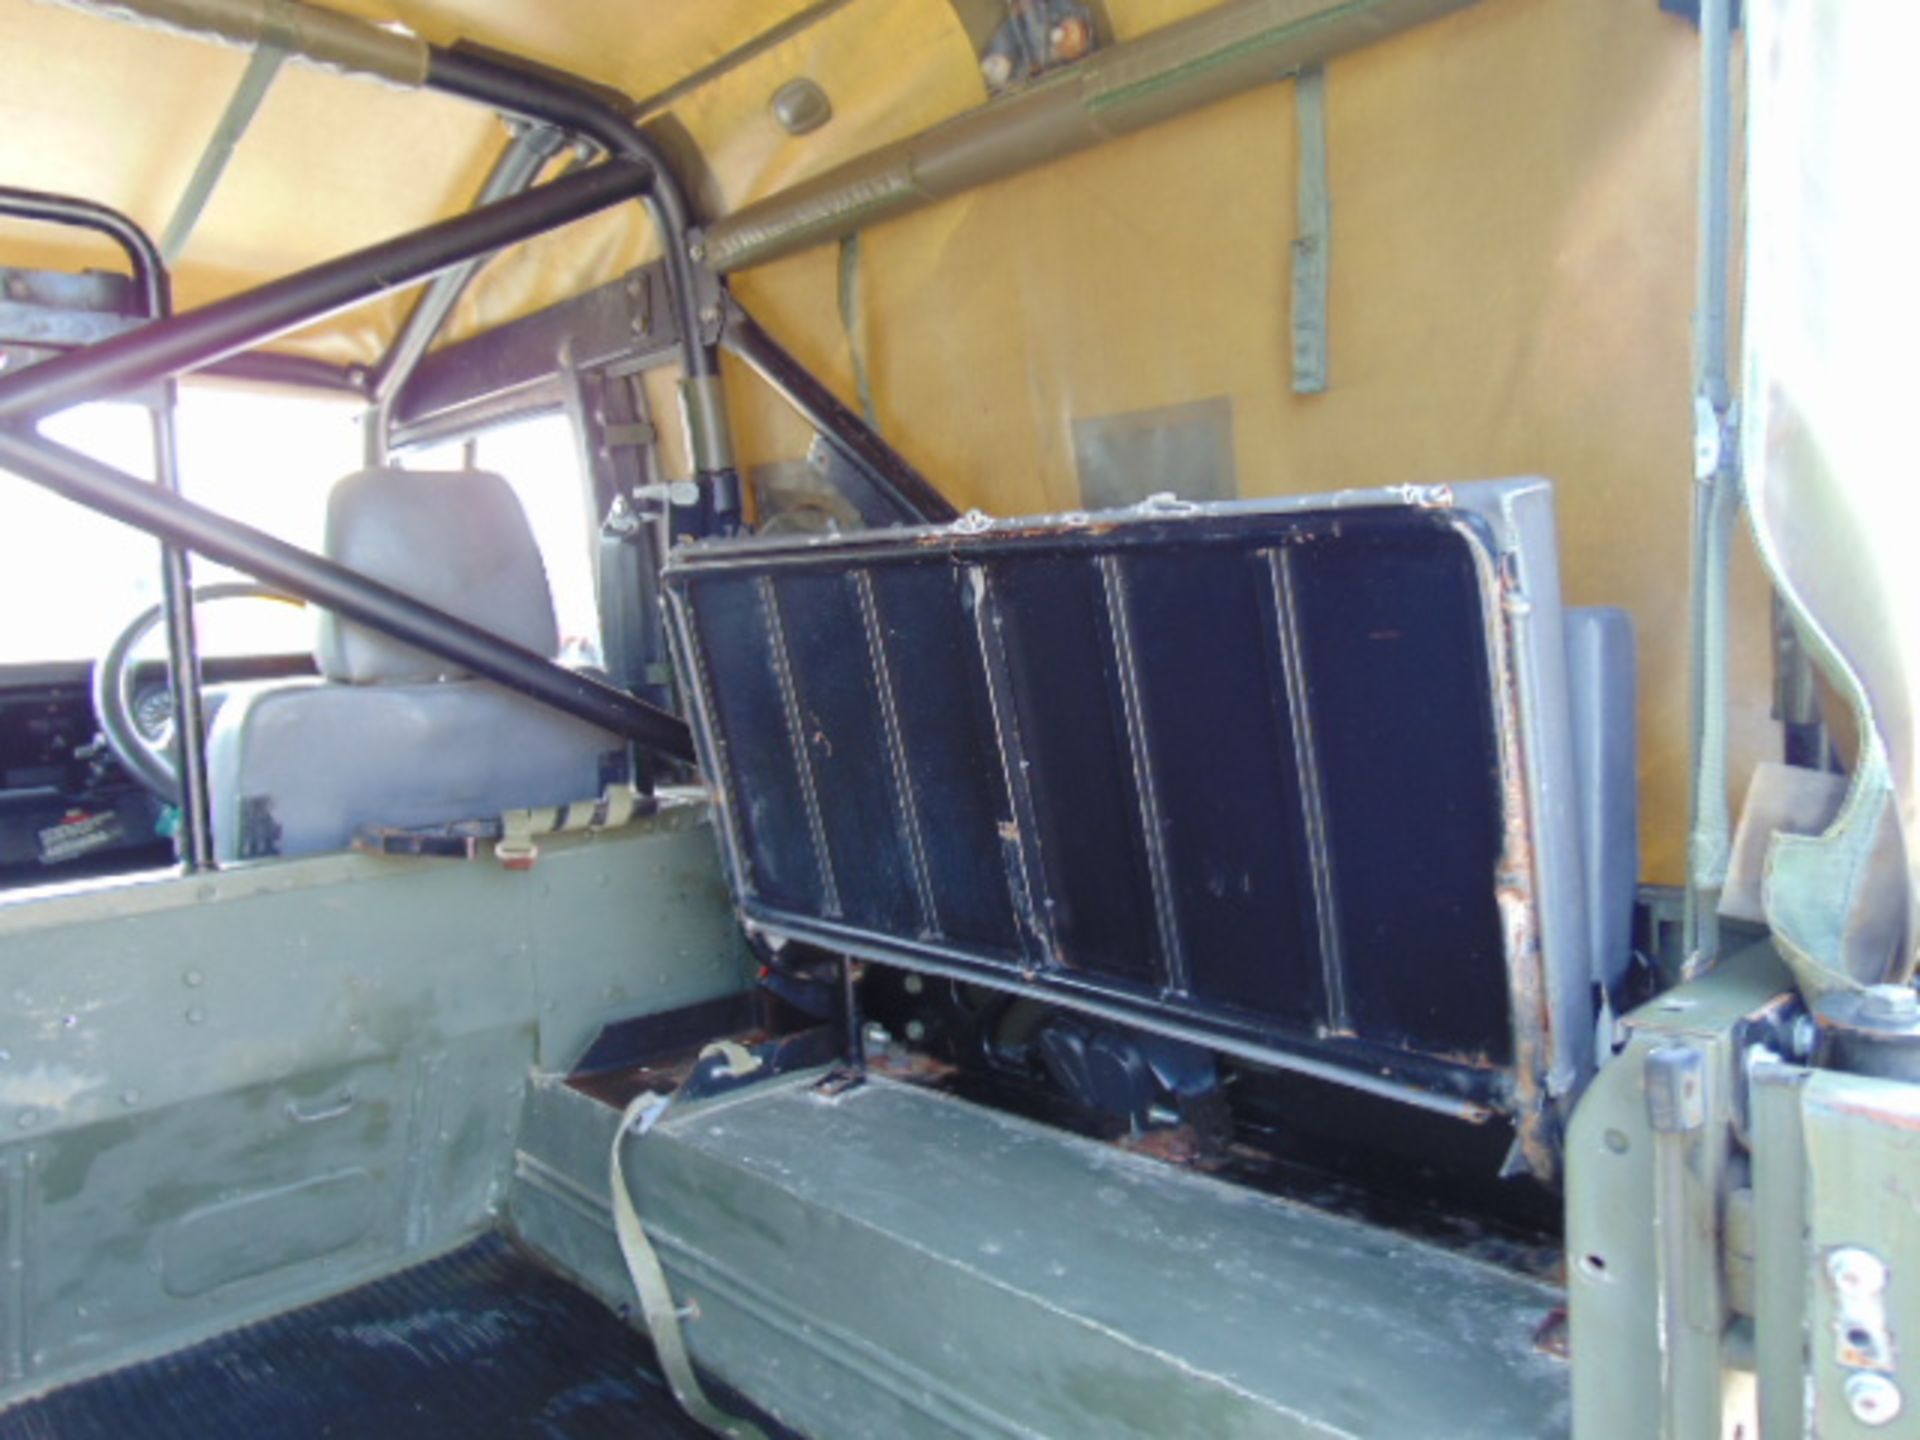 Military Specification Land Rover Wolf 90 Soft Top - Image 15 of 26